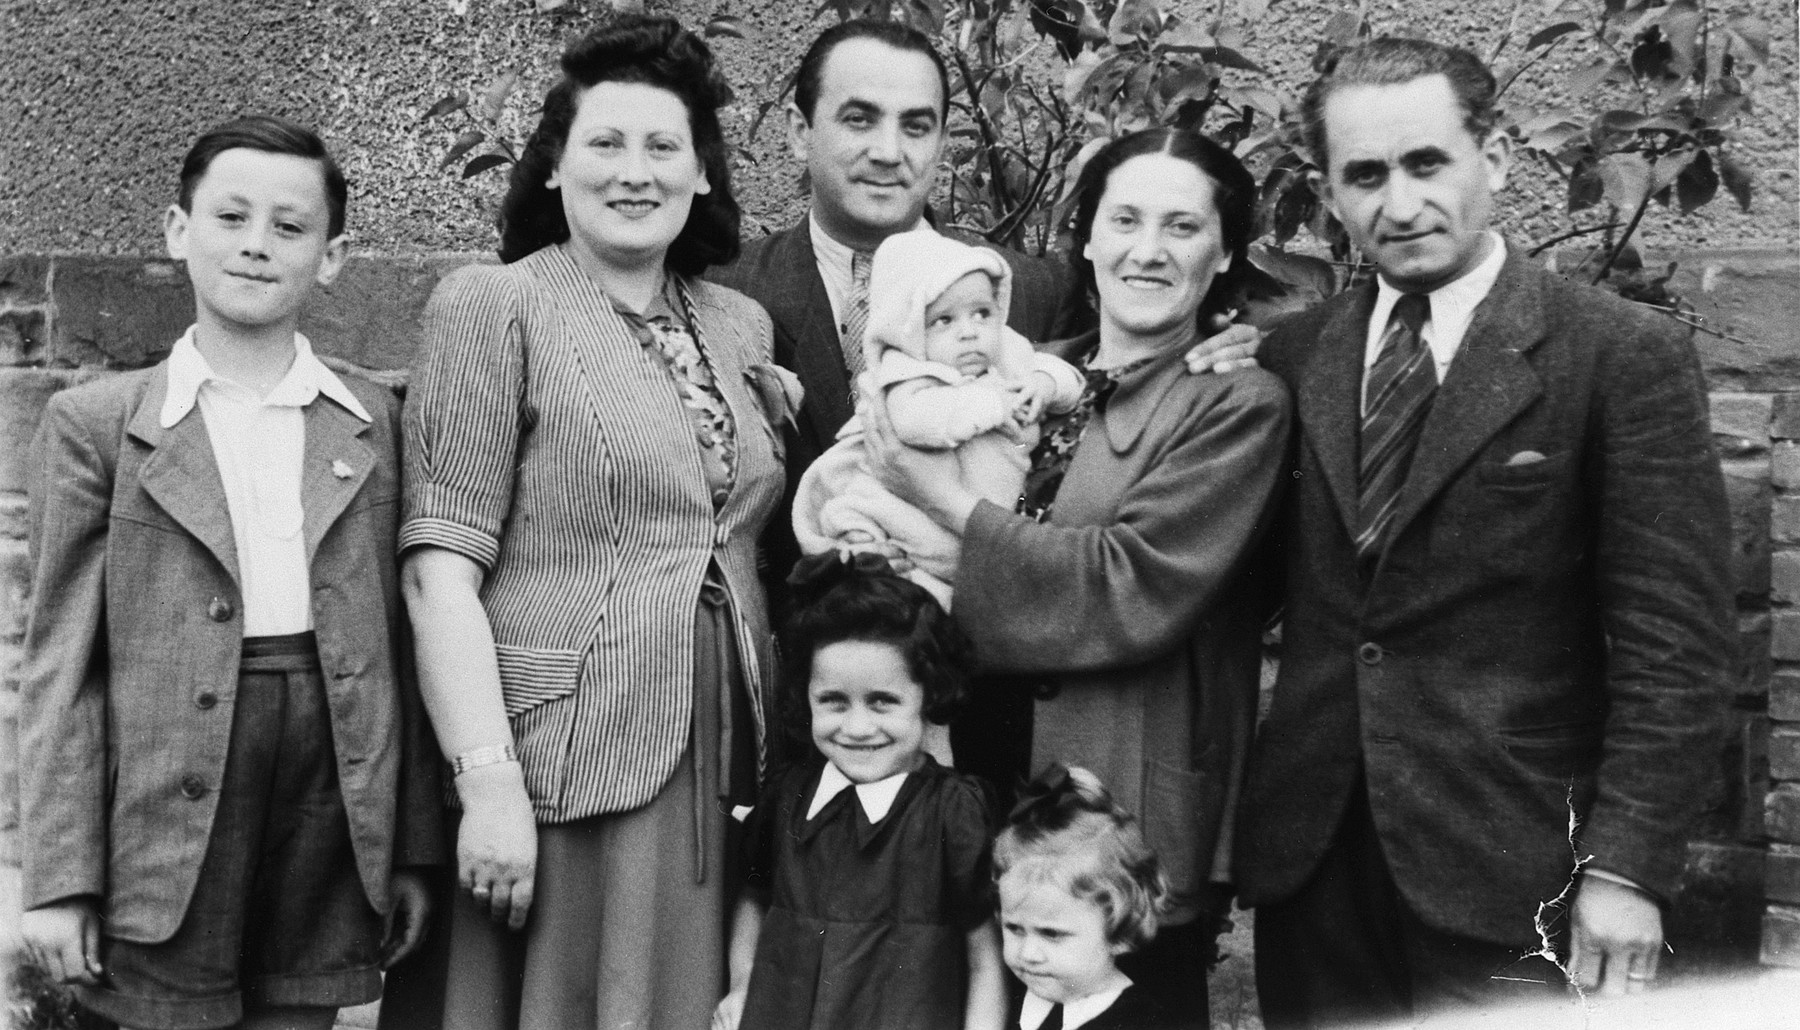 Portrait of an extended Jewish family in the Stuttgart displaced person's camp.

Pictured from left to right are Lova Warszawczyk and his parents, Masha and Josef Warszawczyk, Josef's brother Nathan Warszawczyk, his wife Chana holding her baby Baruch, and daughters Mira and Zilla .